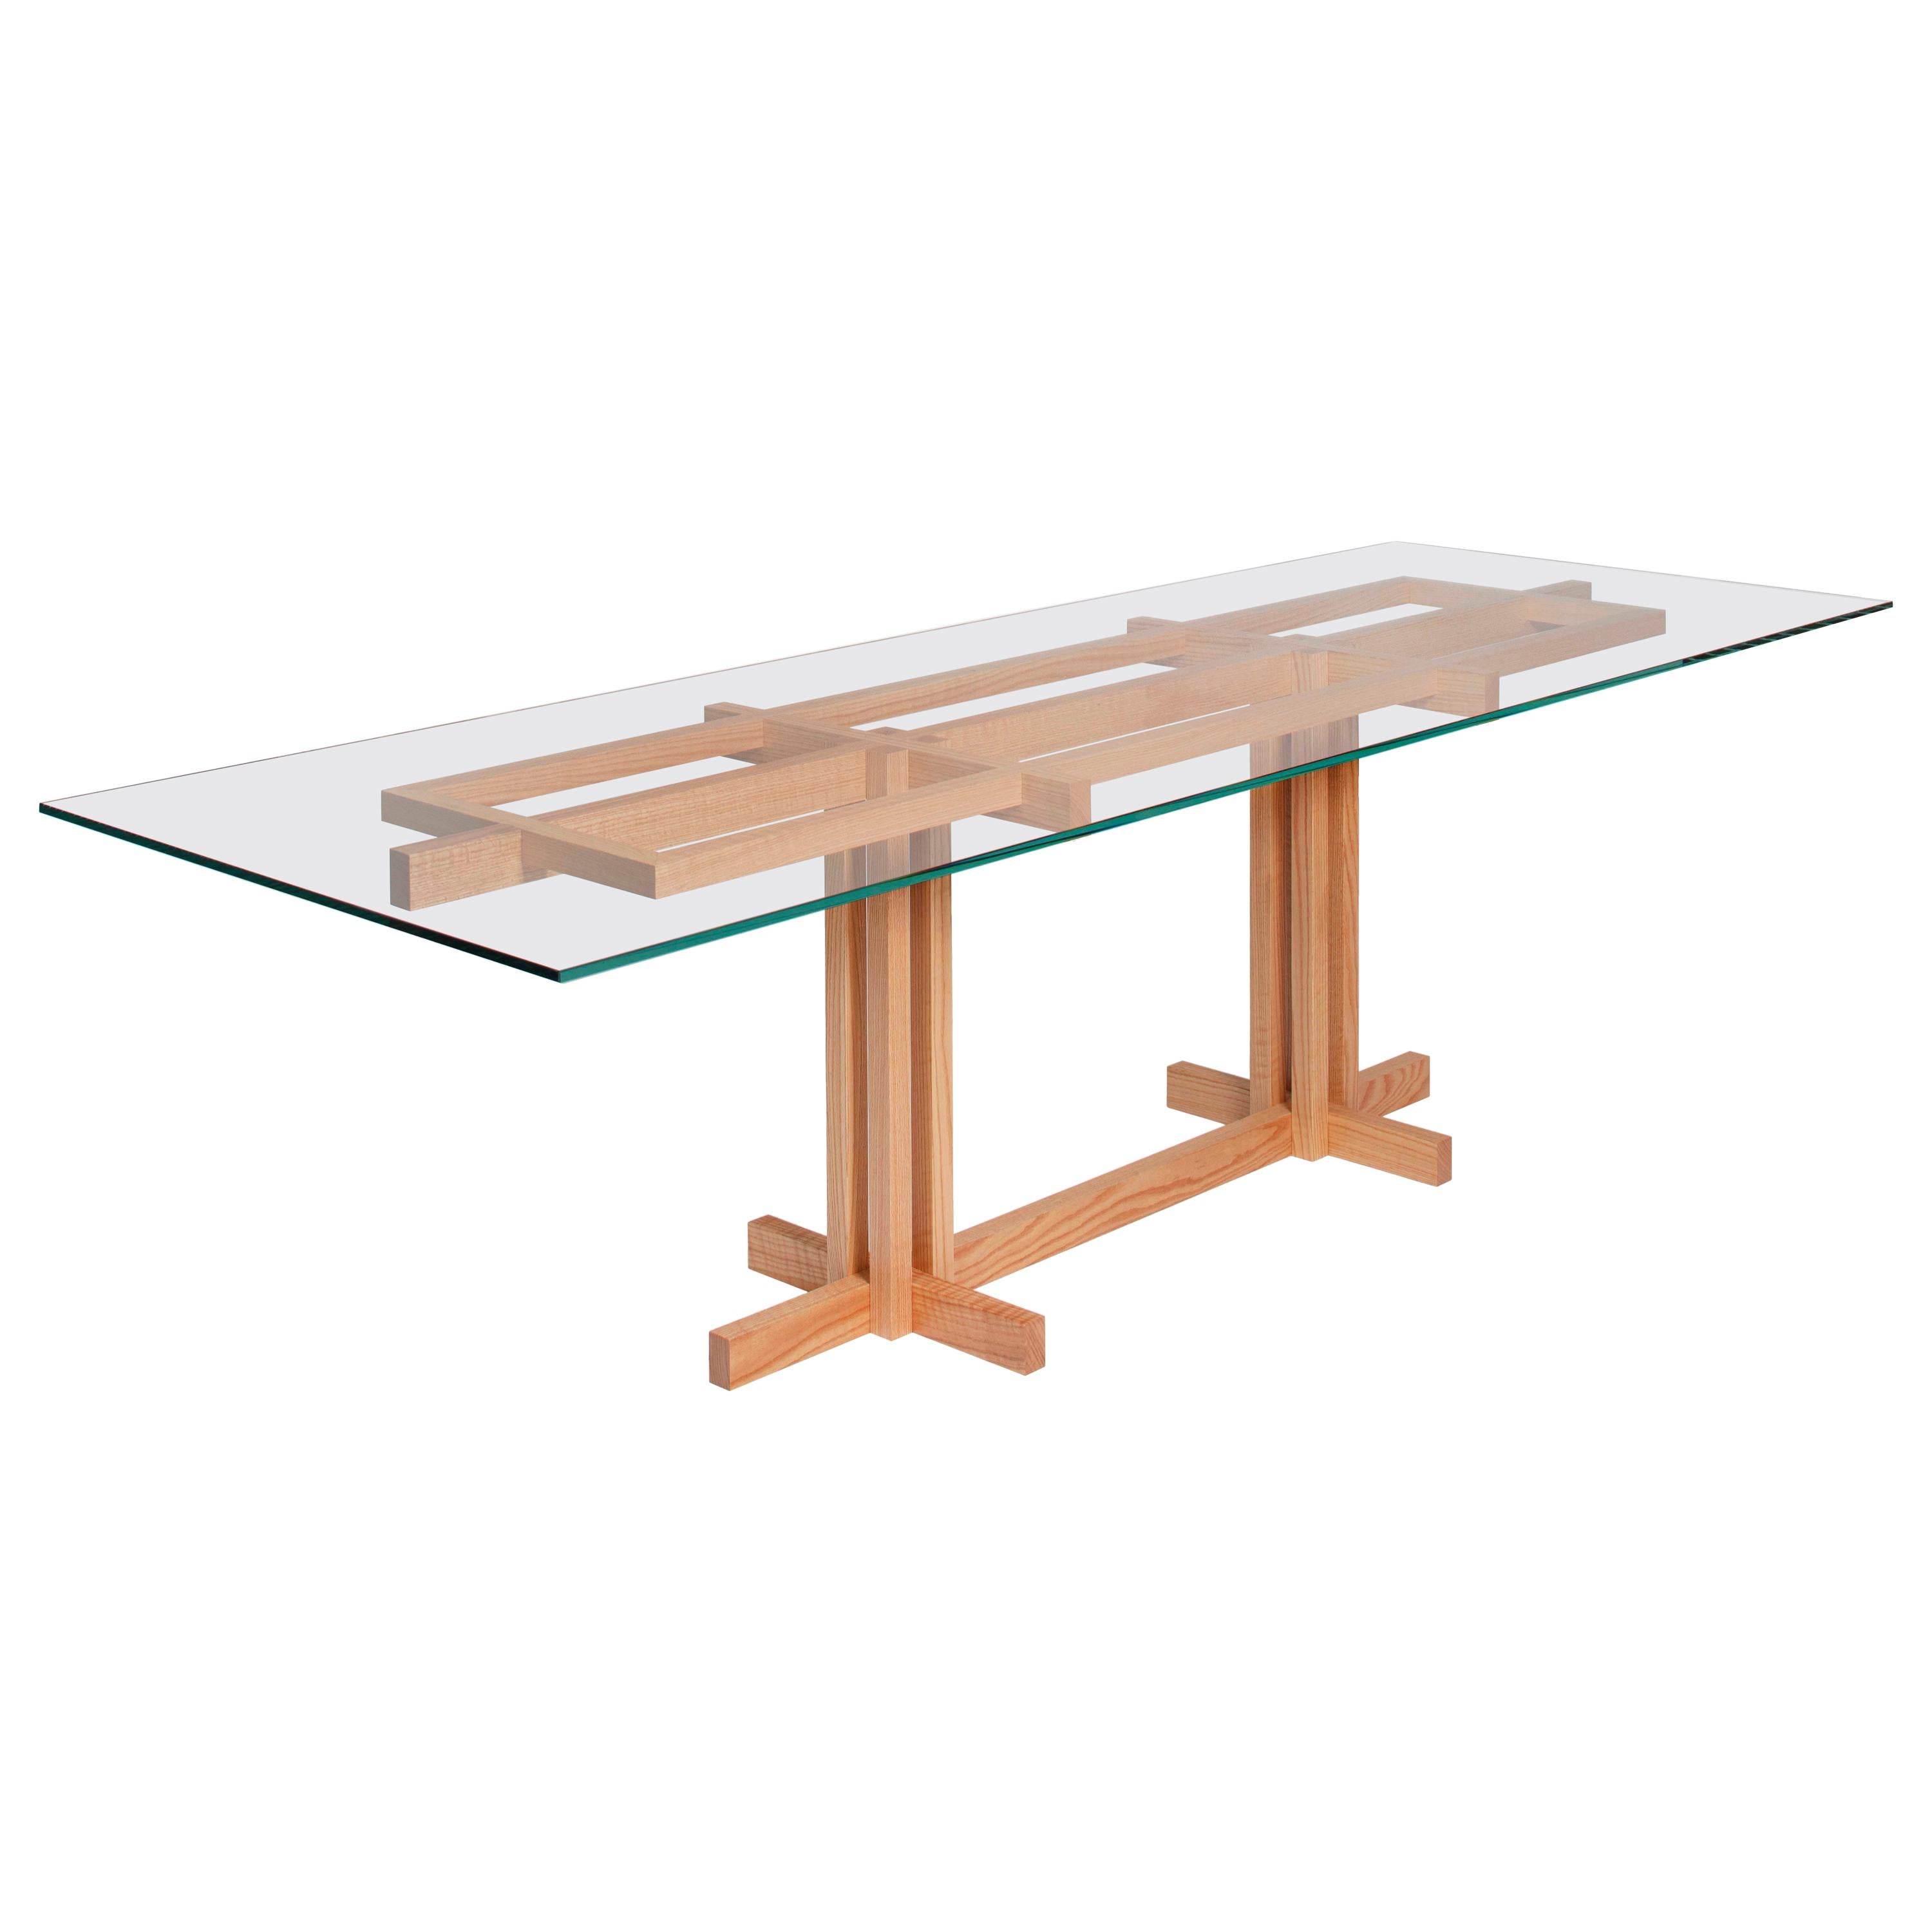 Ray Kappe RK15 Dining Table in Red Oak by Original in Berlin, Germany, 2020 For Sale